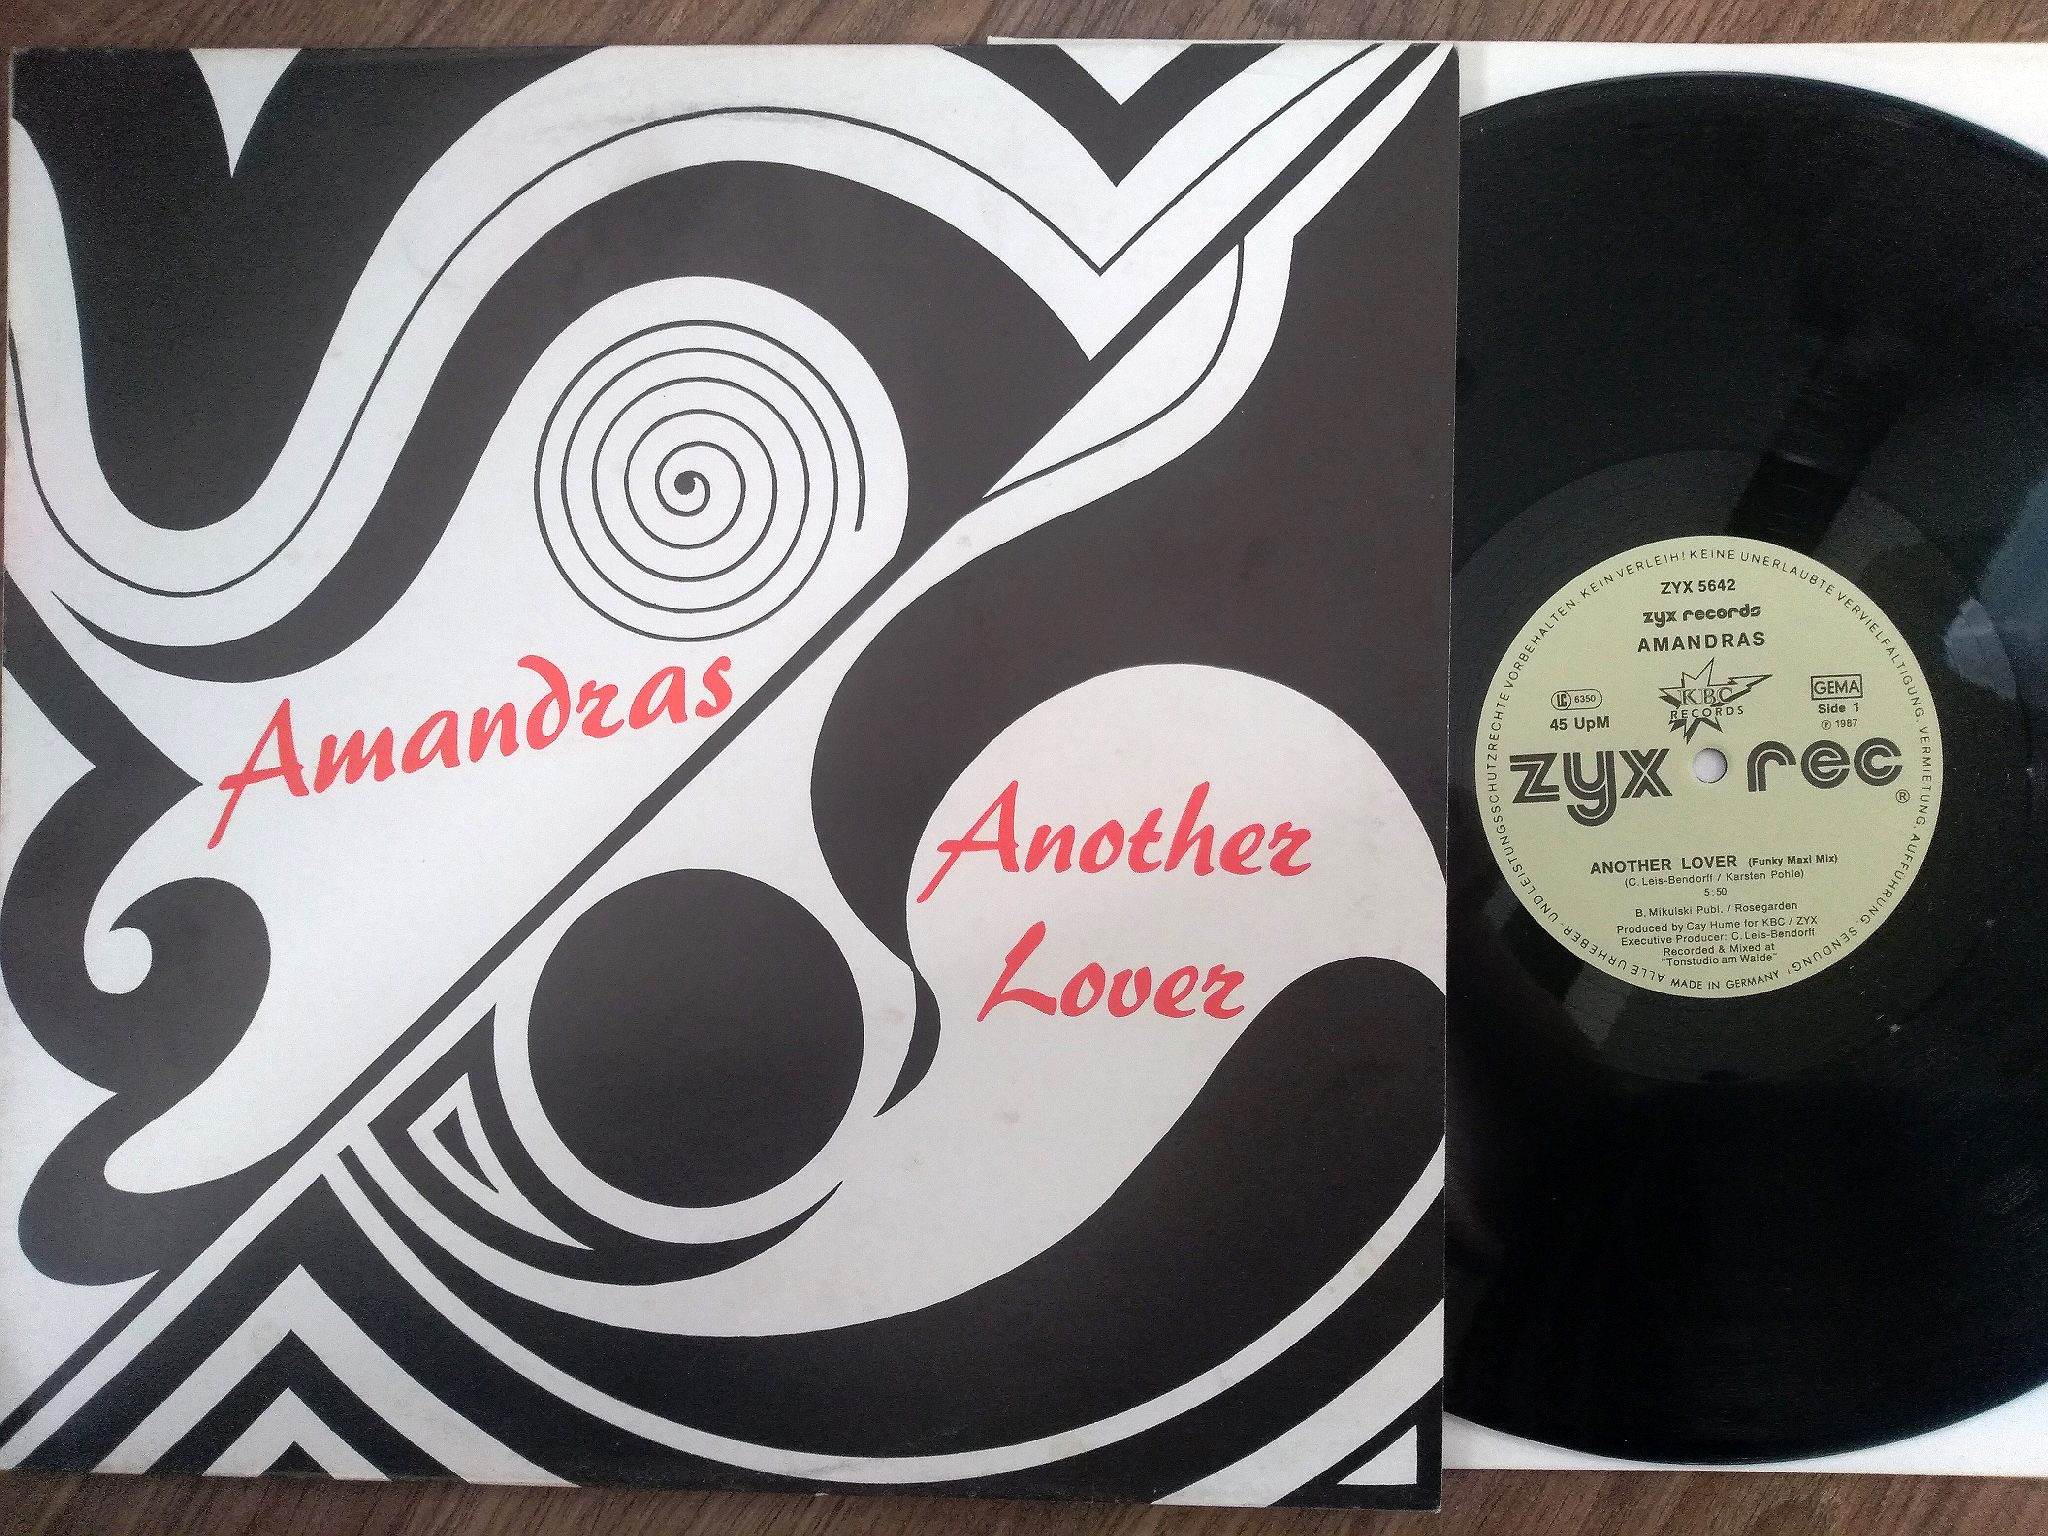 Amandras - Another Lover